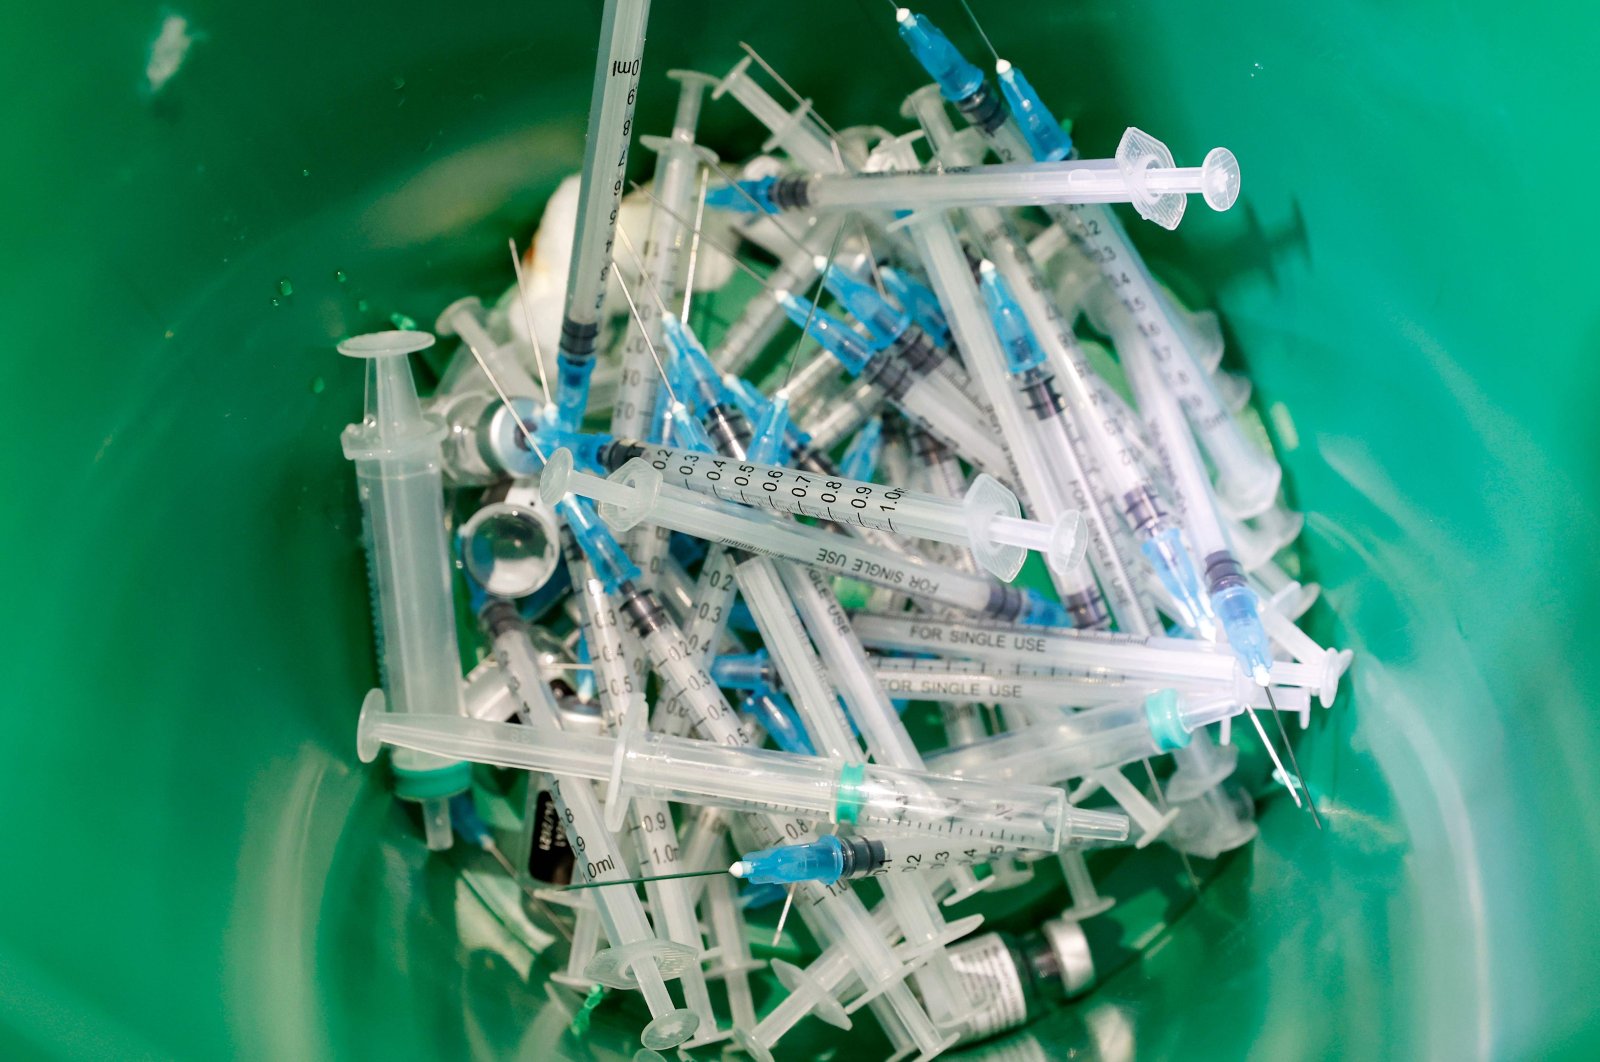 Discarded syringes, used to administer the COVID-19 vaccine, are pictured inside a waste container at a health center, Umm al-Fahm, Israel, Jan. 4, 2021. (AFP Photo)